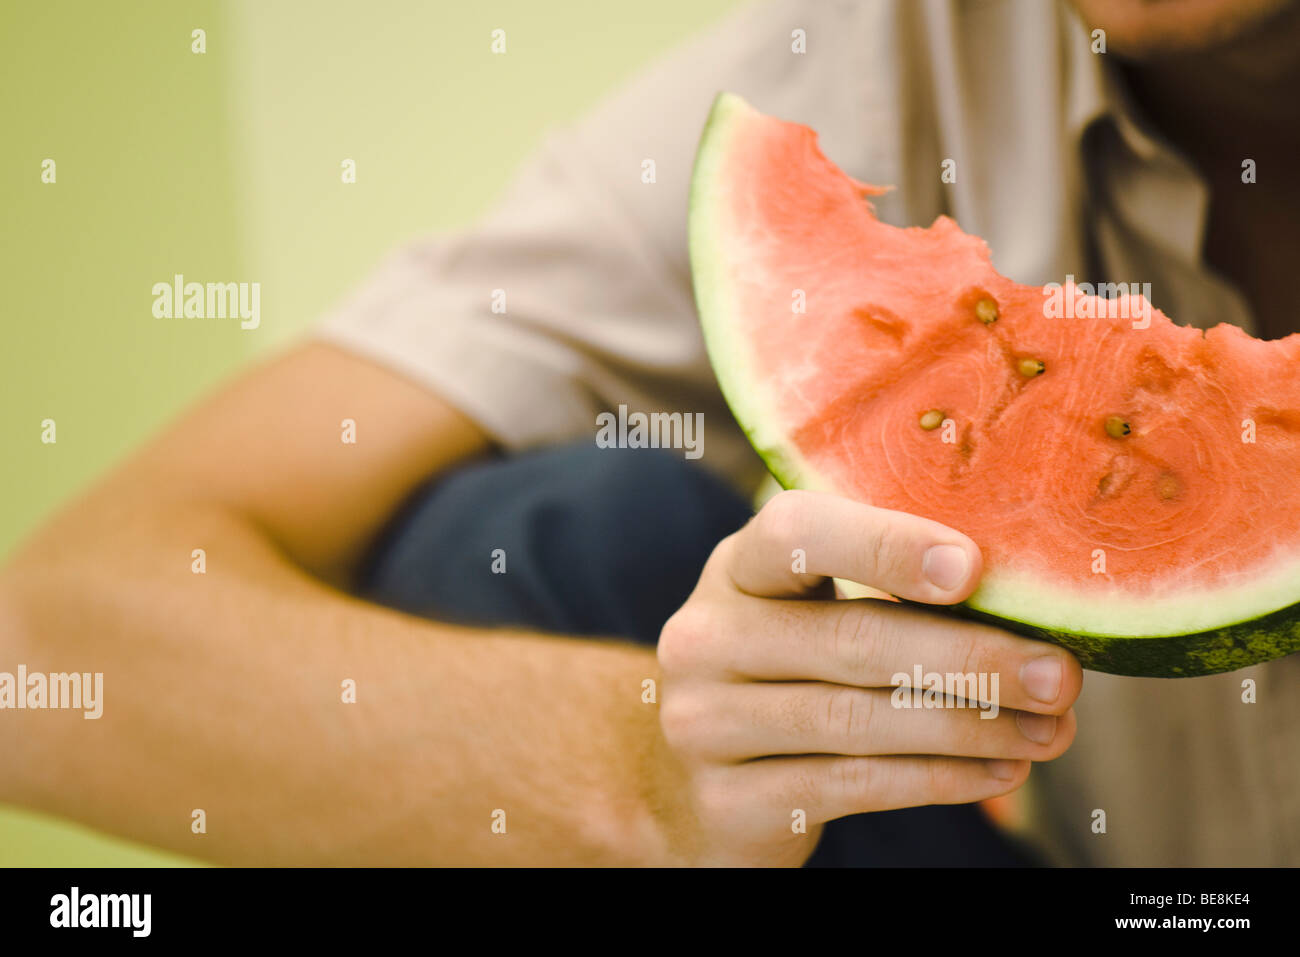 Man holding slice of watermelon, cropped Stock Photo